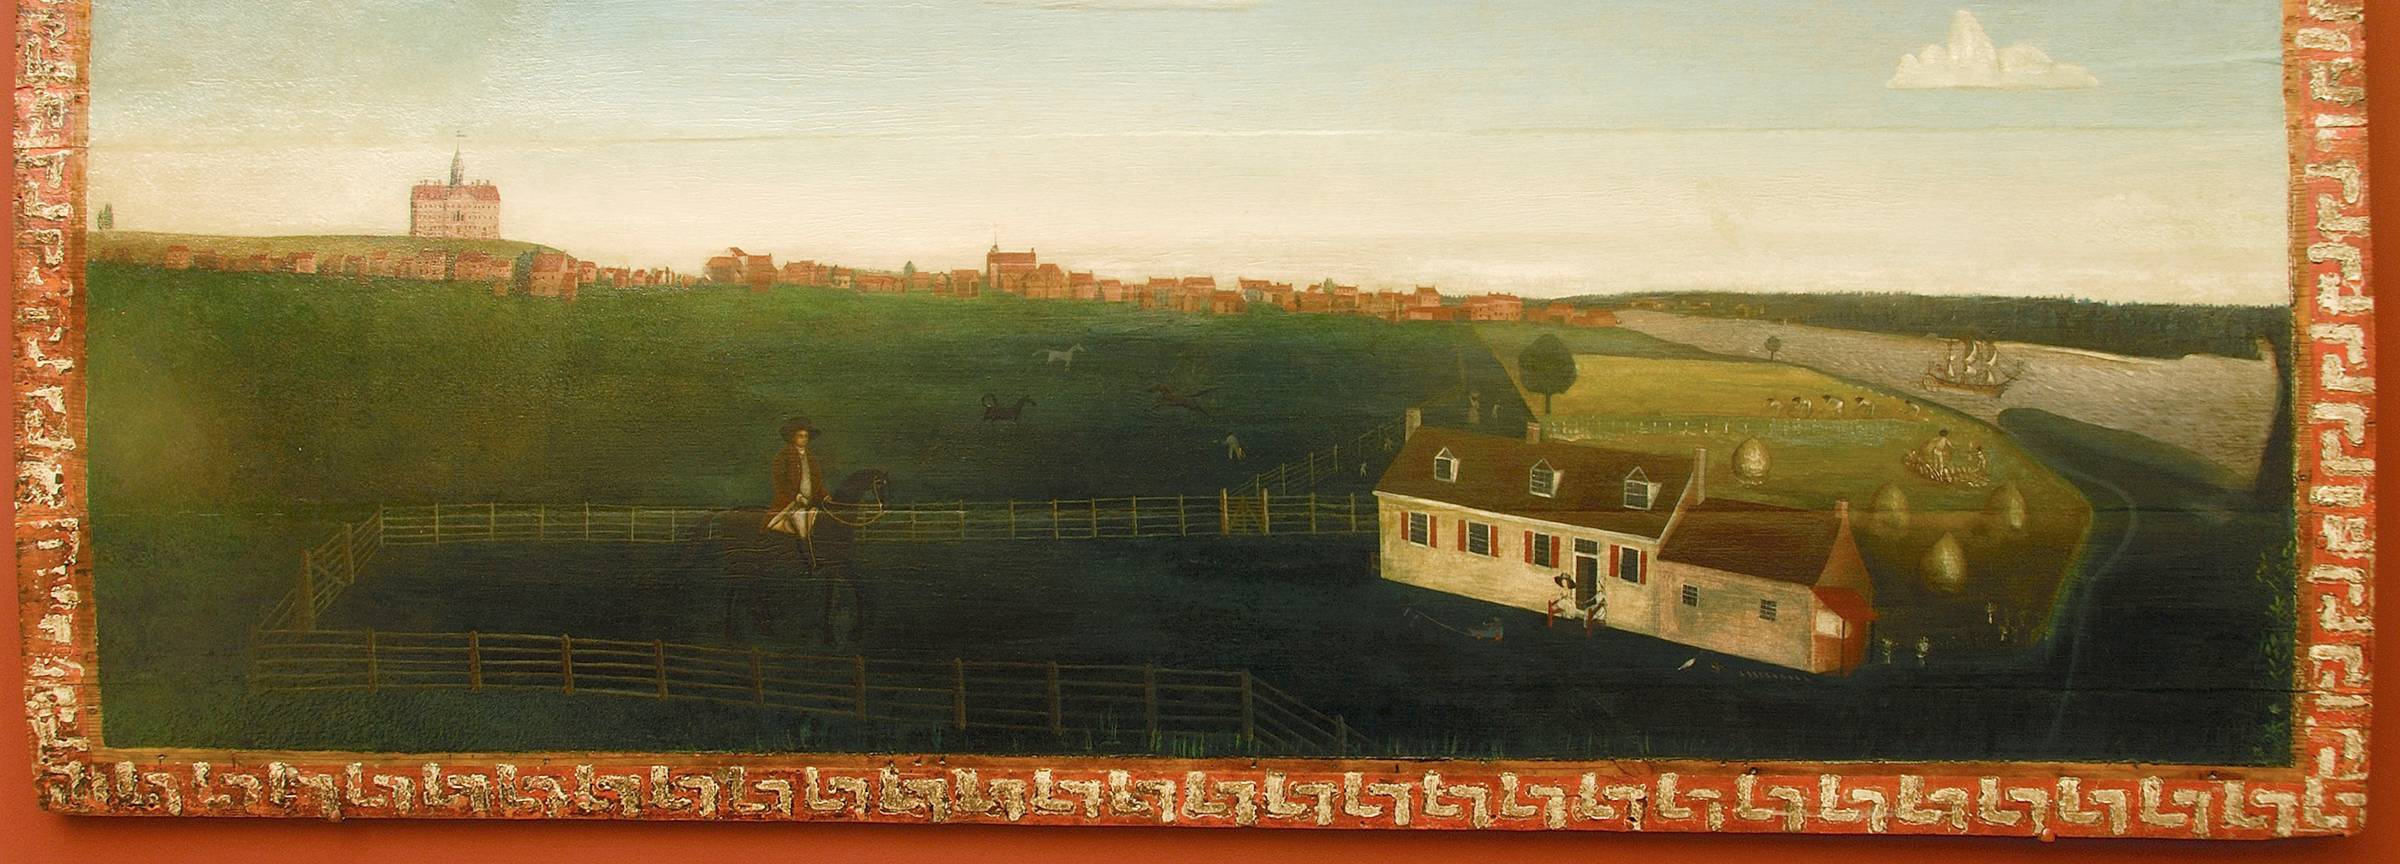 A View of Chestertown from White House Farm